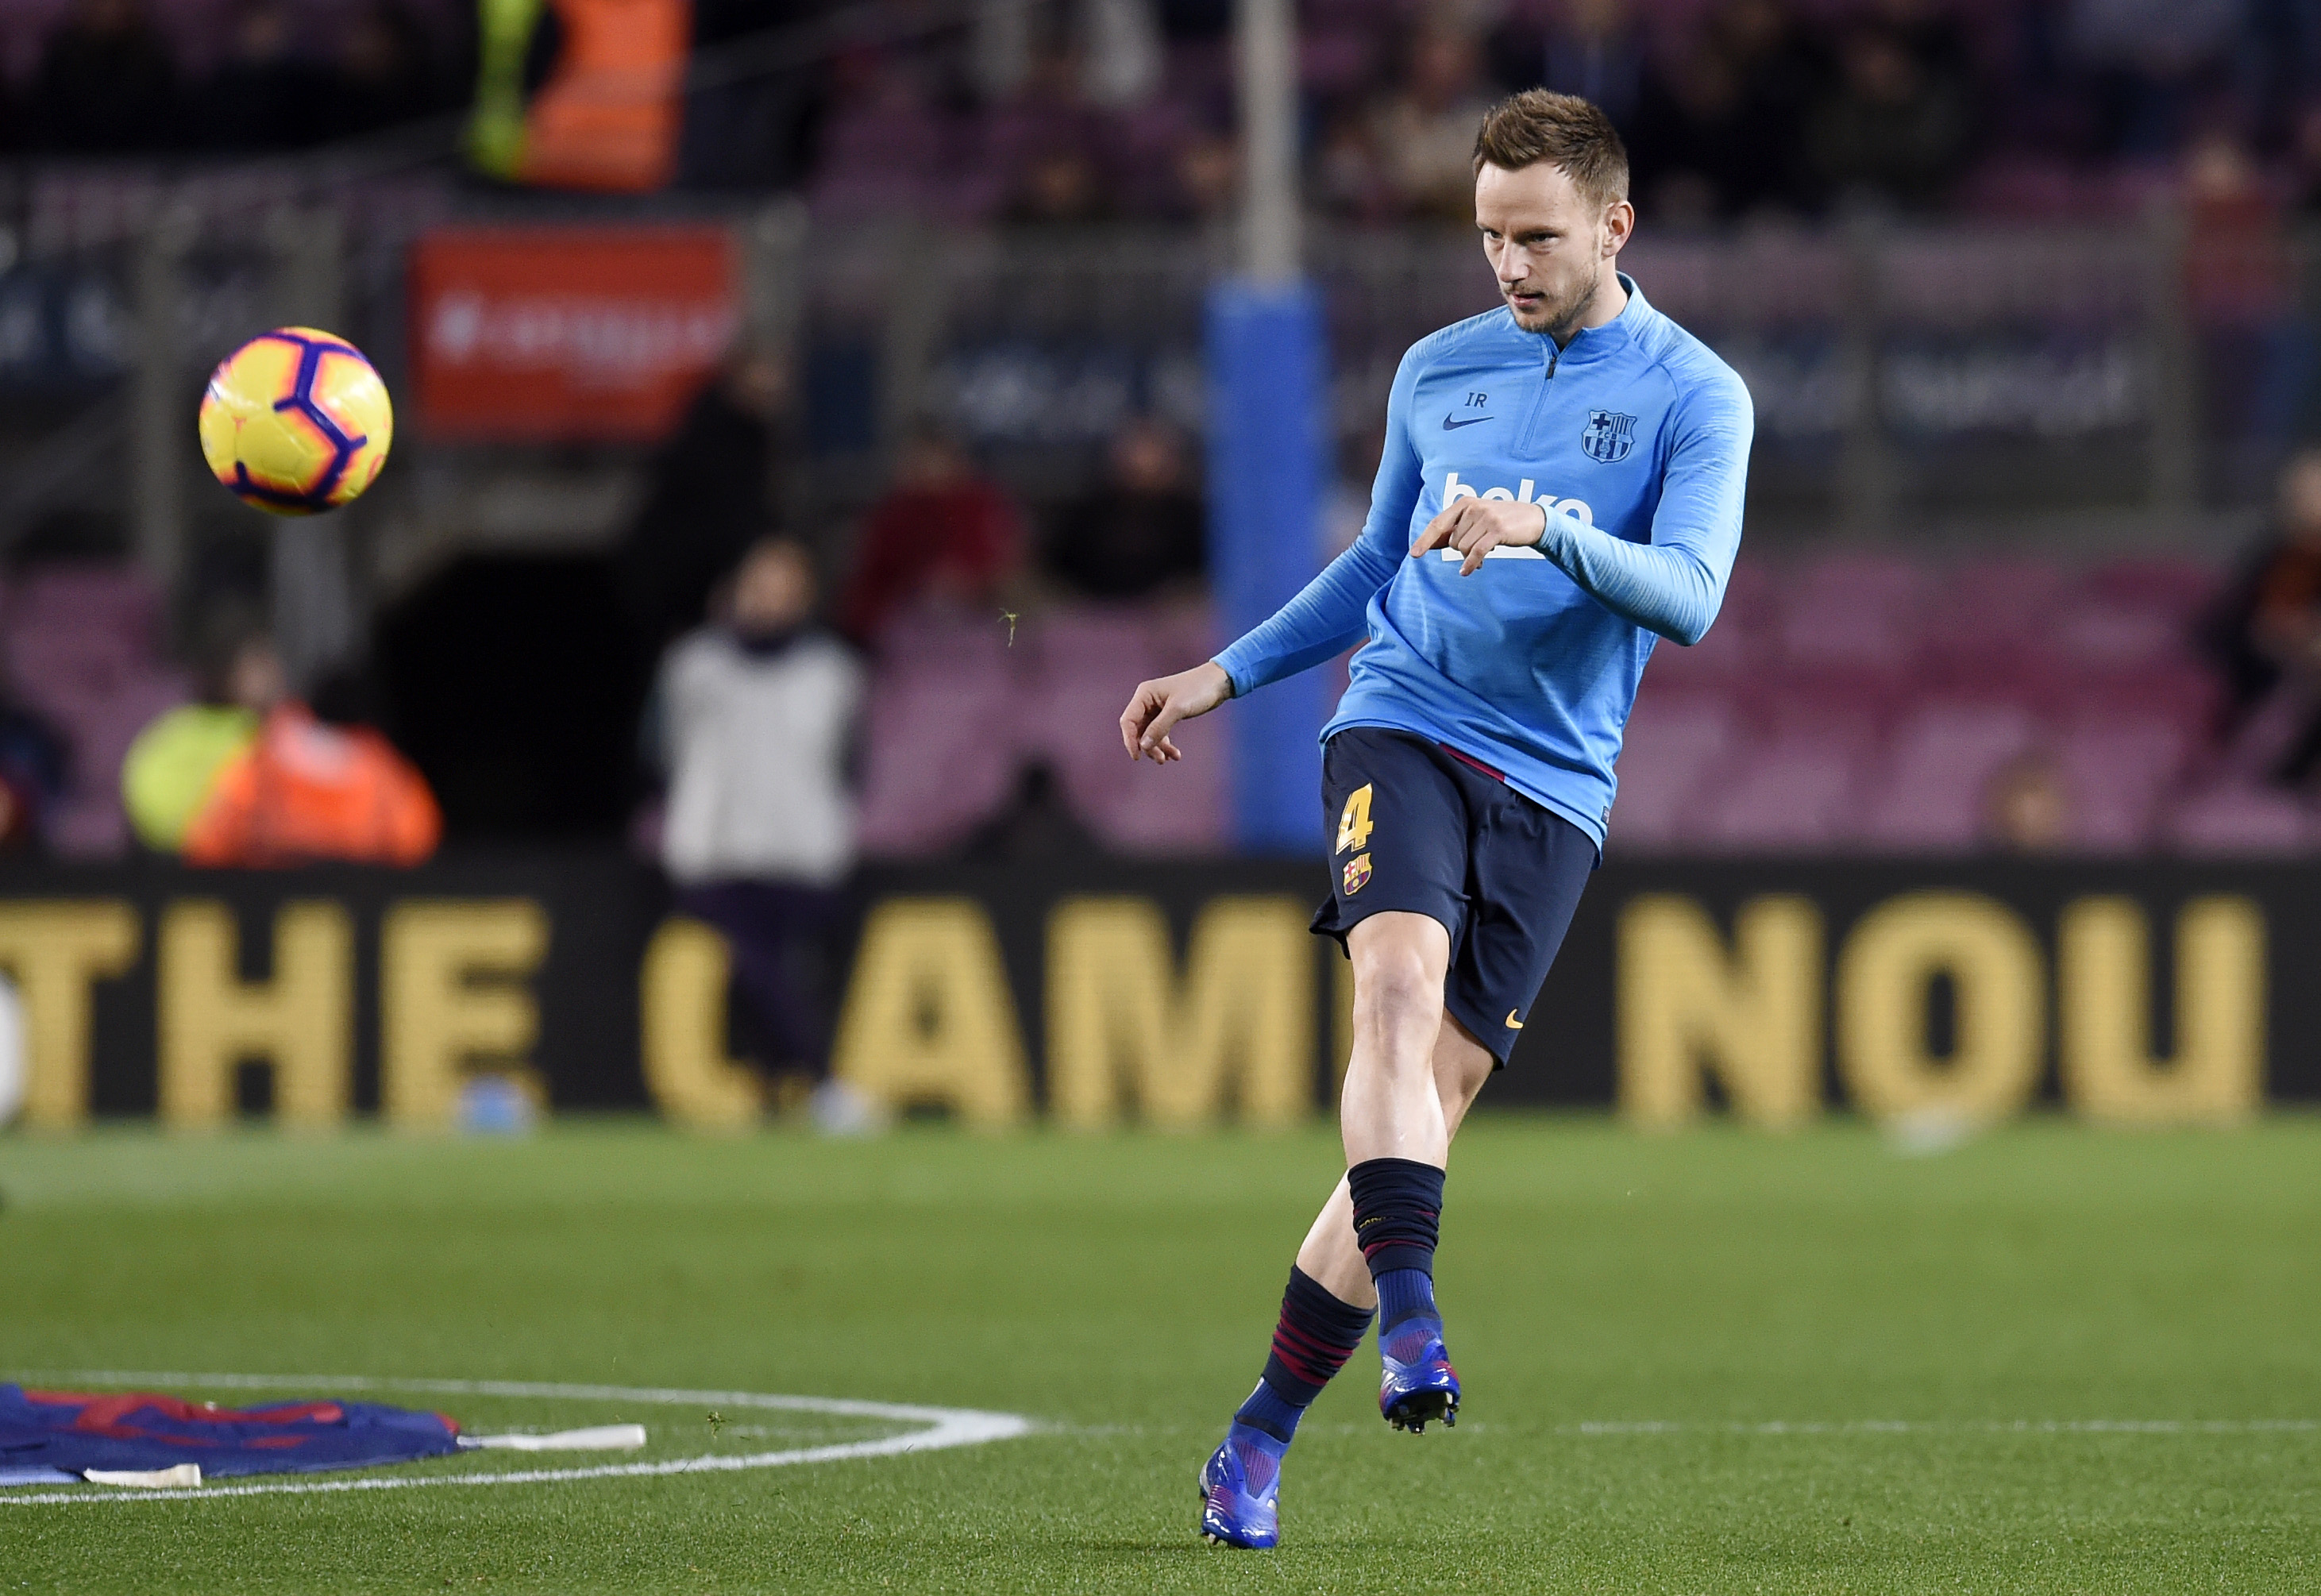 BARCELONA, SPAIN - FEBRUARY 02:  Ivan Rakitic of Barcelona warms up prior to the La Liga match between FC Barcelona and Valencia CF at Camp Nou on February 2, 2019 in Barcelona, Spain.  (Photo by Alex Caparros/Getty Images)